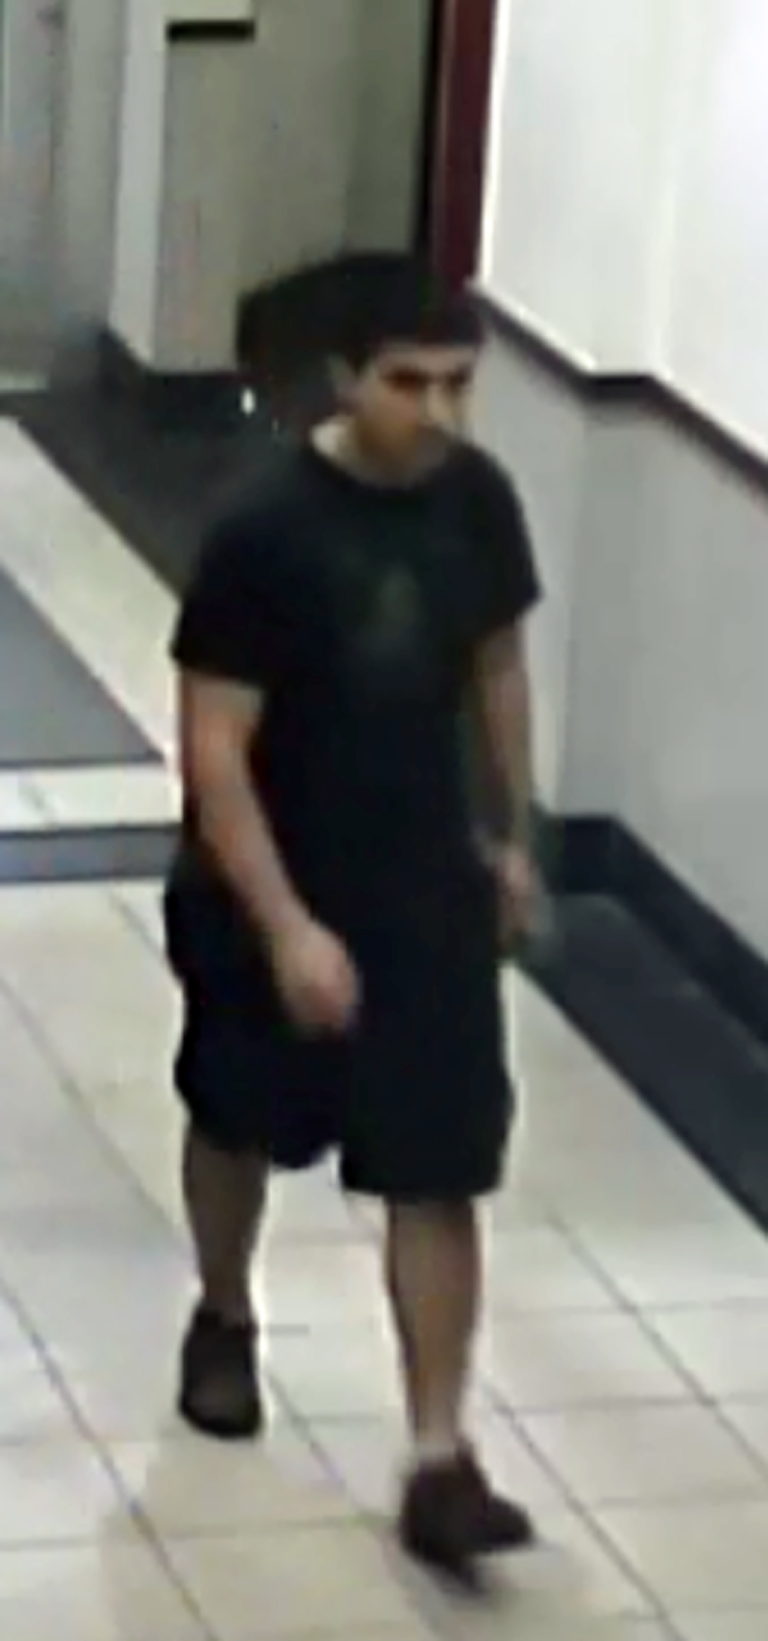 This Friday, Sept. 23, 2016 frame from surveillance video provided by the Washington State Patrol shows the suspect in a shooting rampage at the Cascade Mall in Burlington, Wash., as authorities seek the public's help in identifying and locating him.  The weapon was recovered but the suspect remained at large early Saturday.